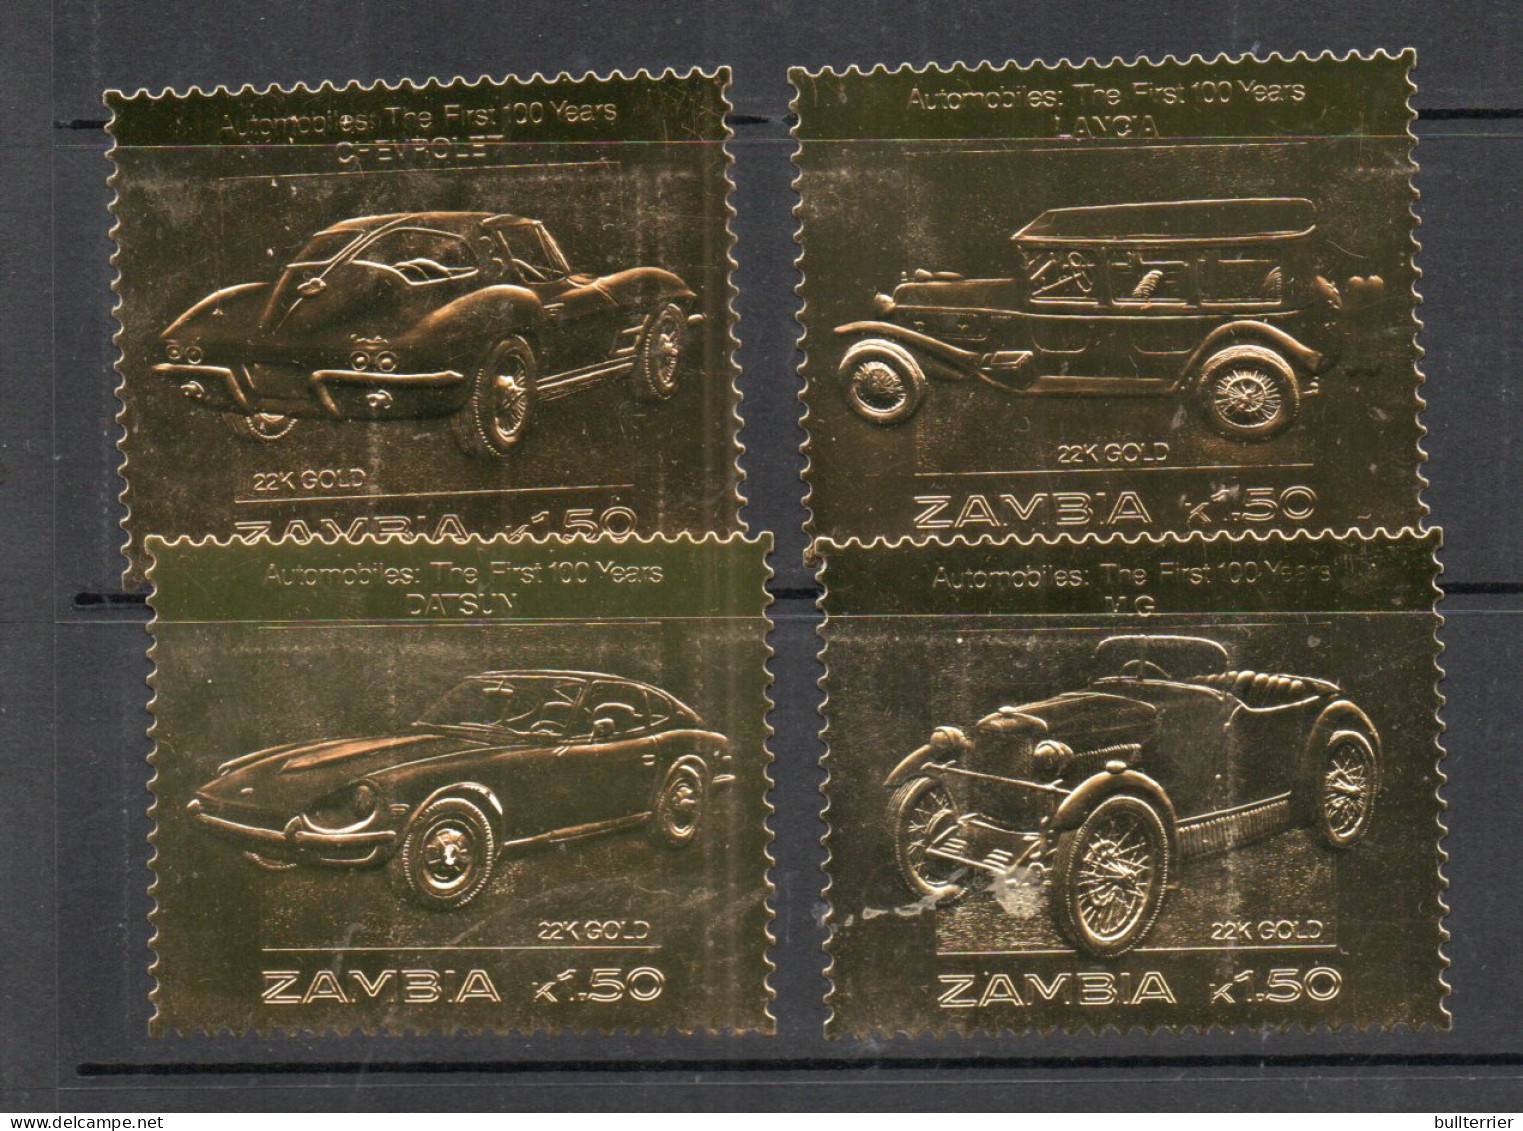 ZAMBIA - 1987 - CLASSIC CARS SET OF 4 GOLD  FOIL EMBOSSED  MINT NEVER HINGED  - Columbiformes